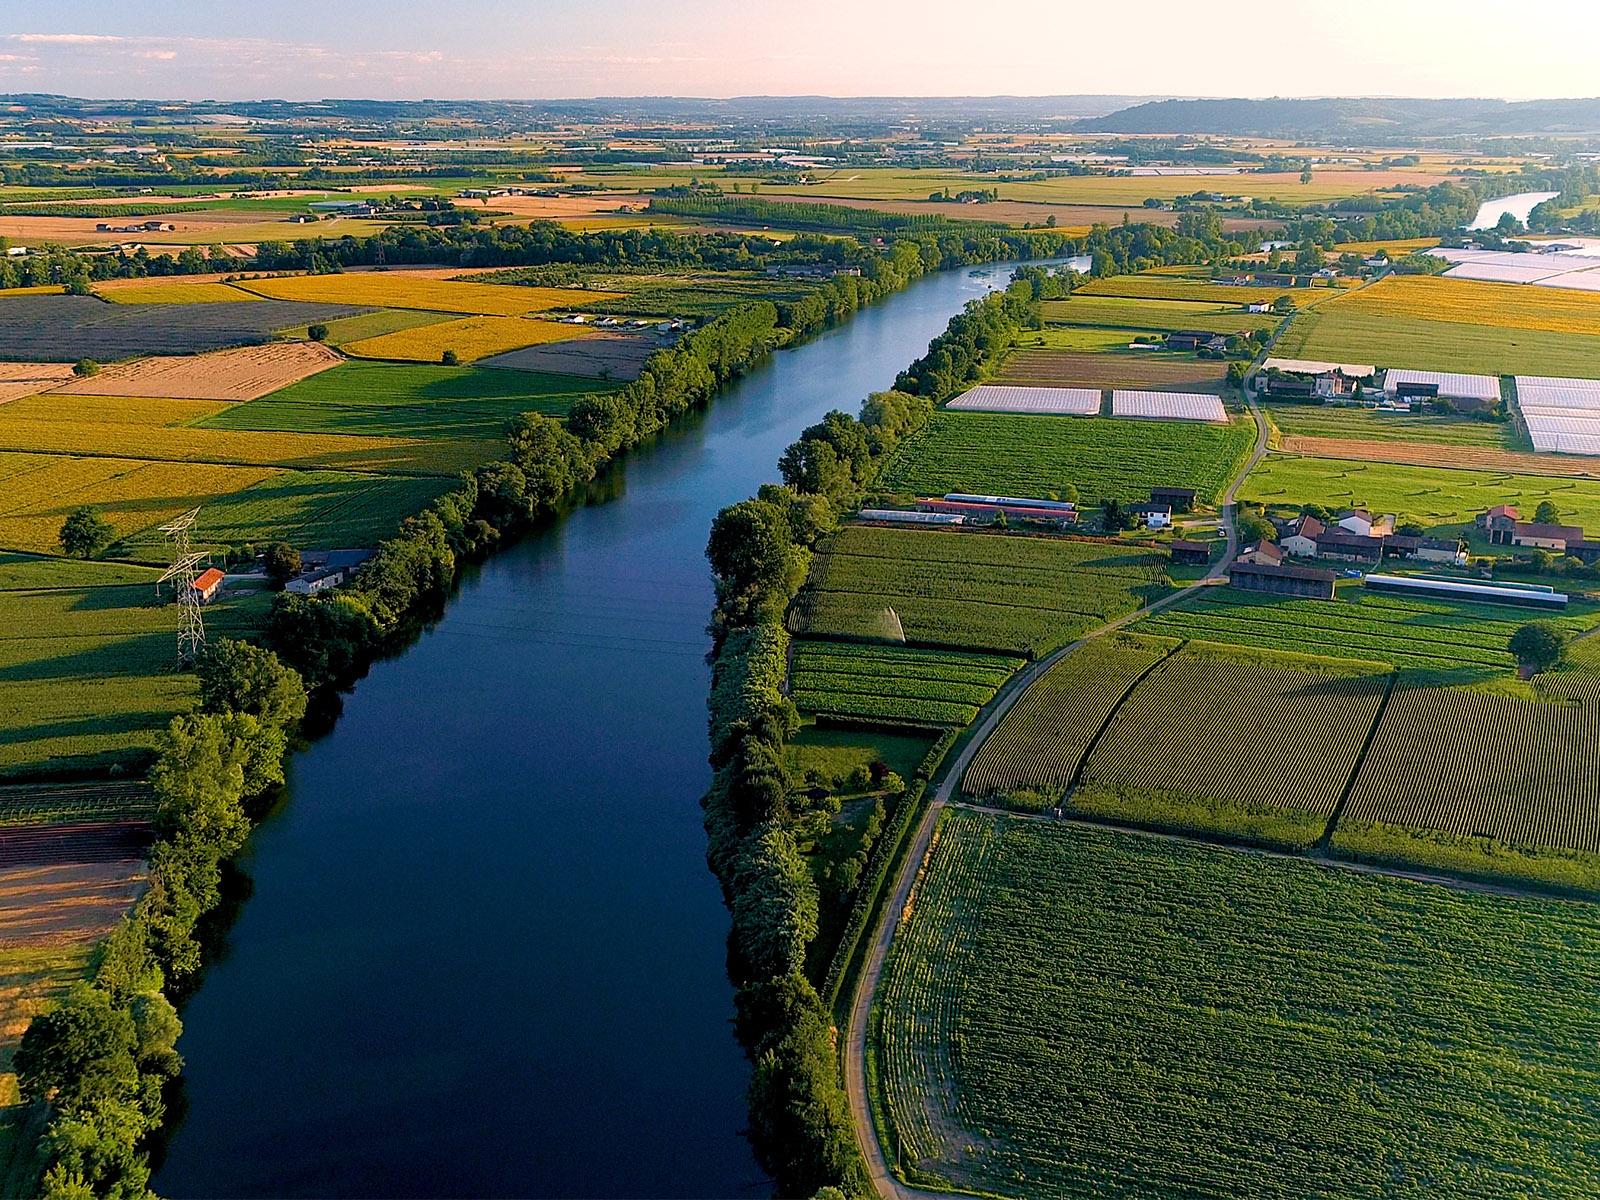 A bright photograph of a river running through agricultural land